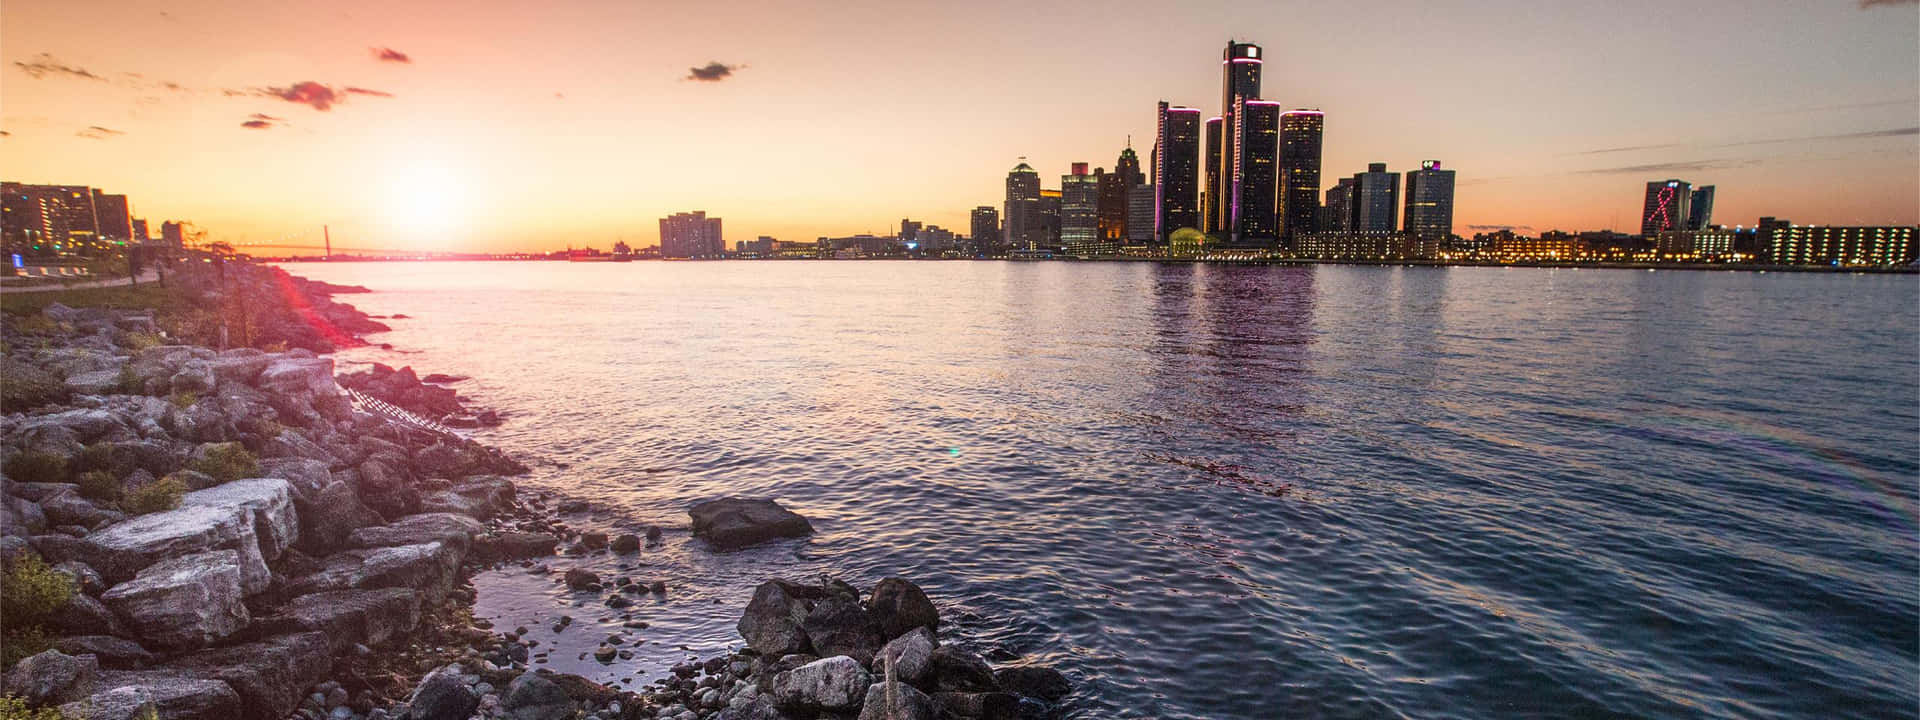 A City Skyline With A Sunset Over The Water